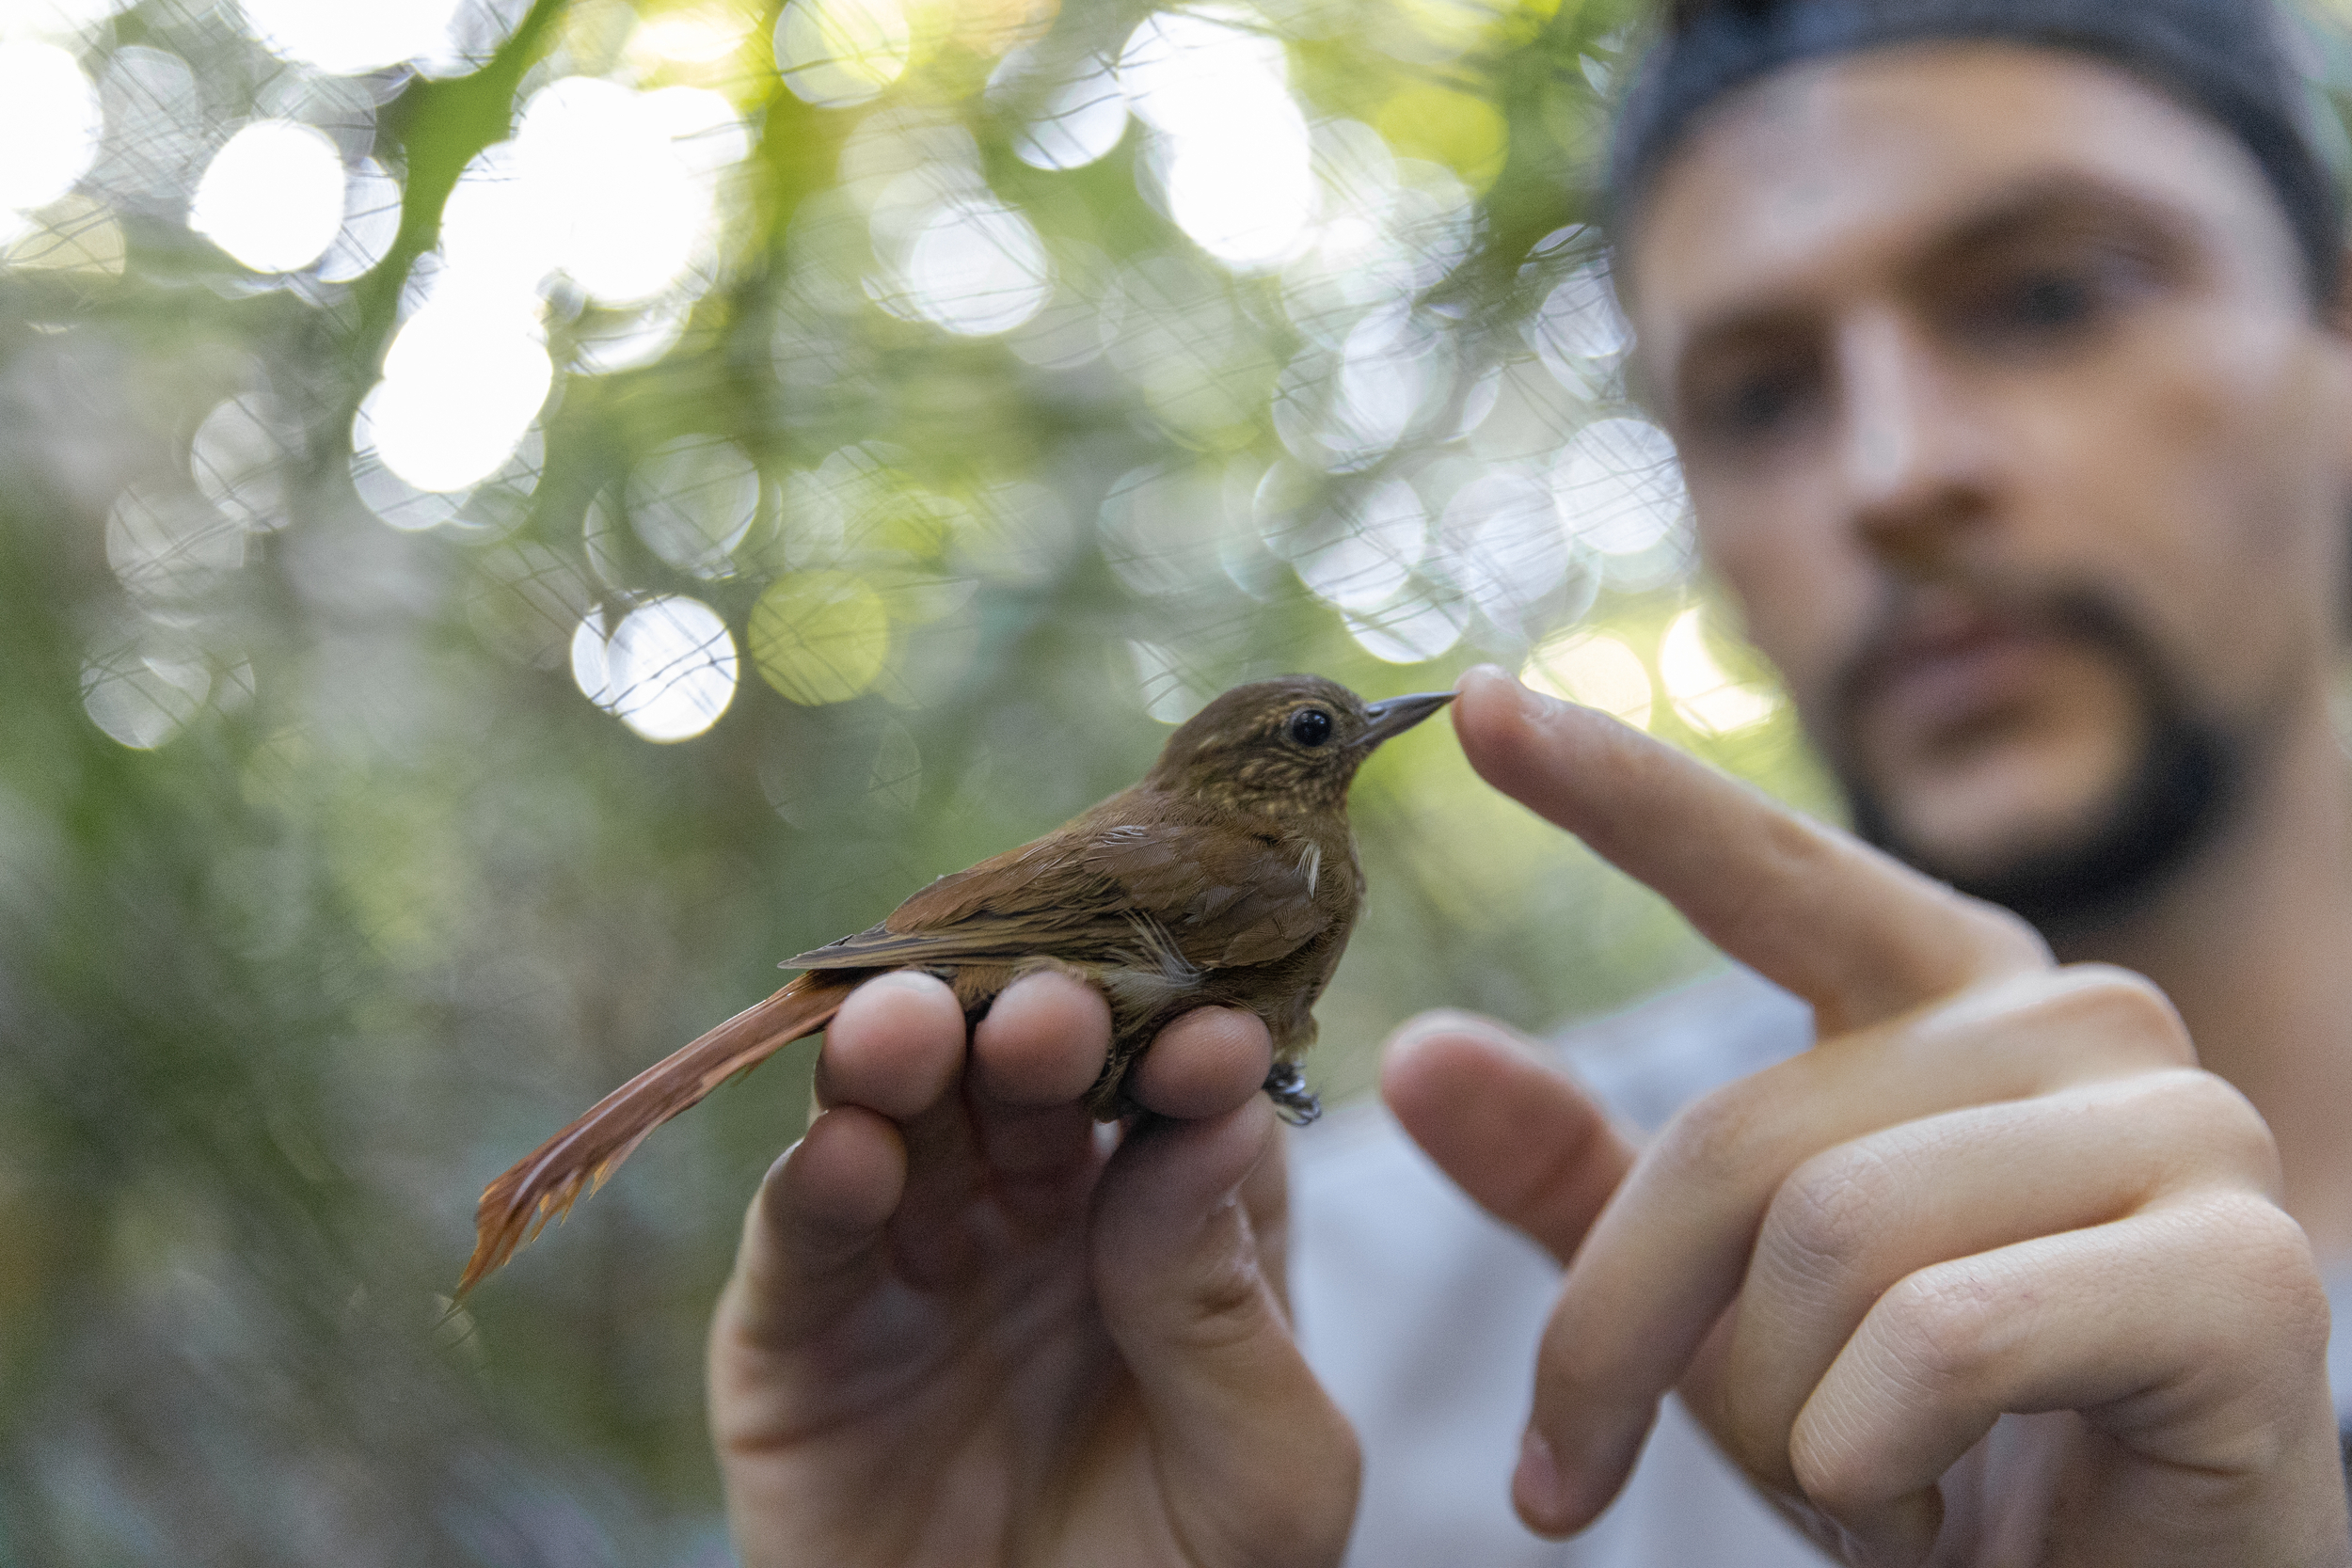 A small brown bird perches on a person’s fingers as they gently touch its beak.